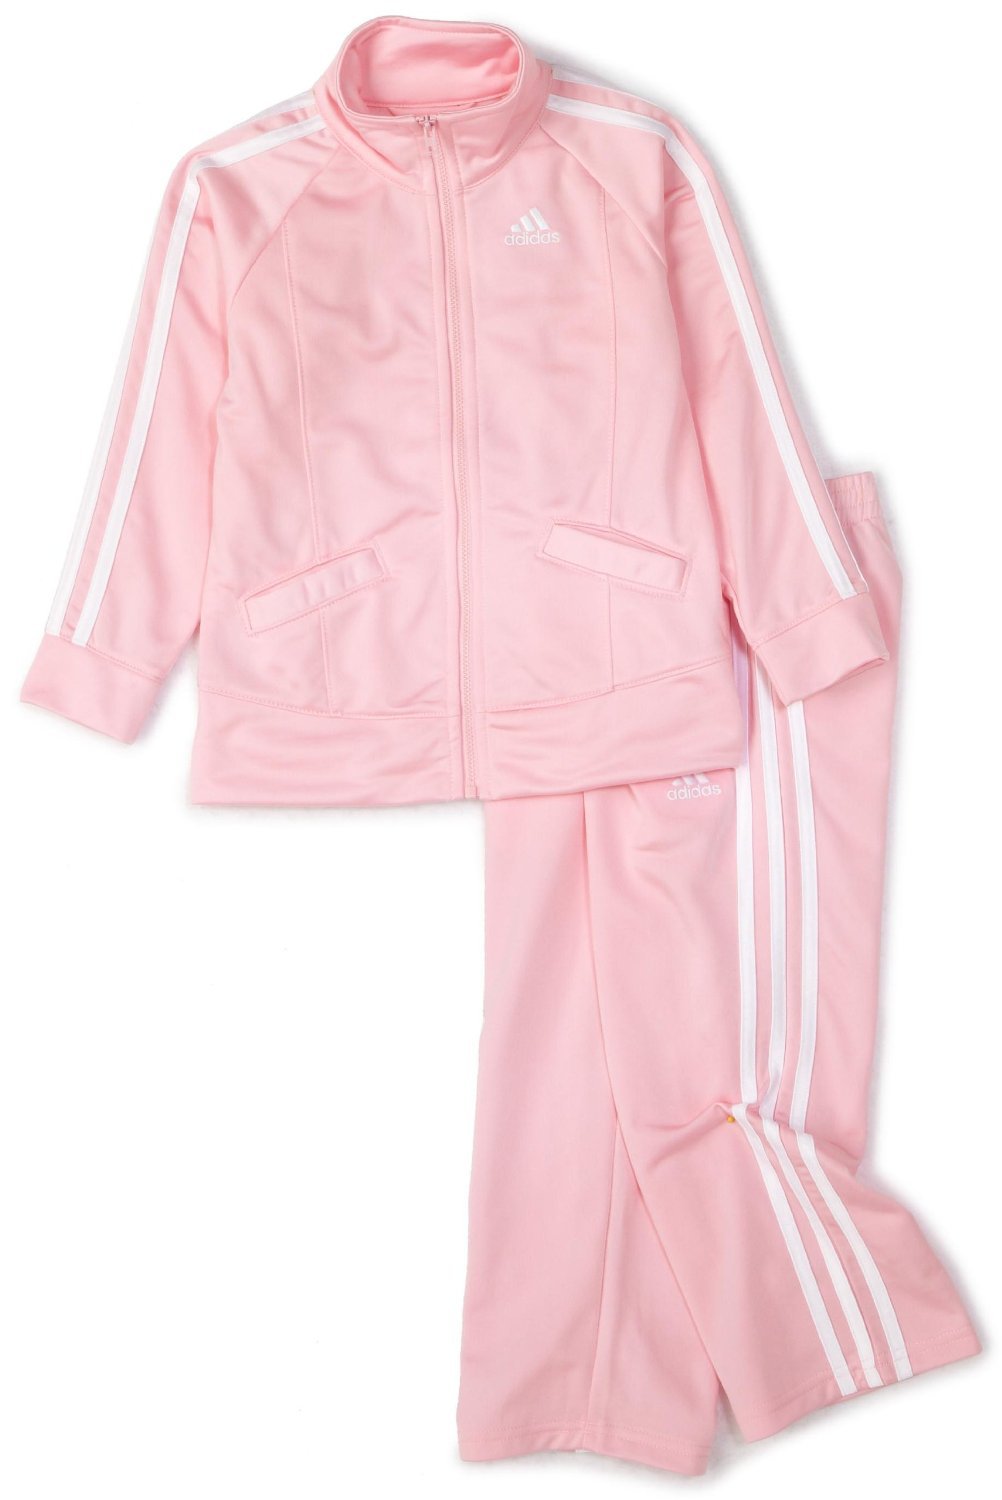 adidas pink suit